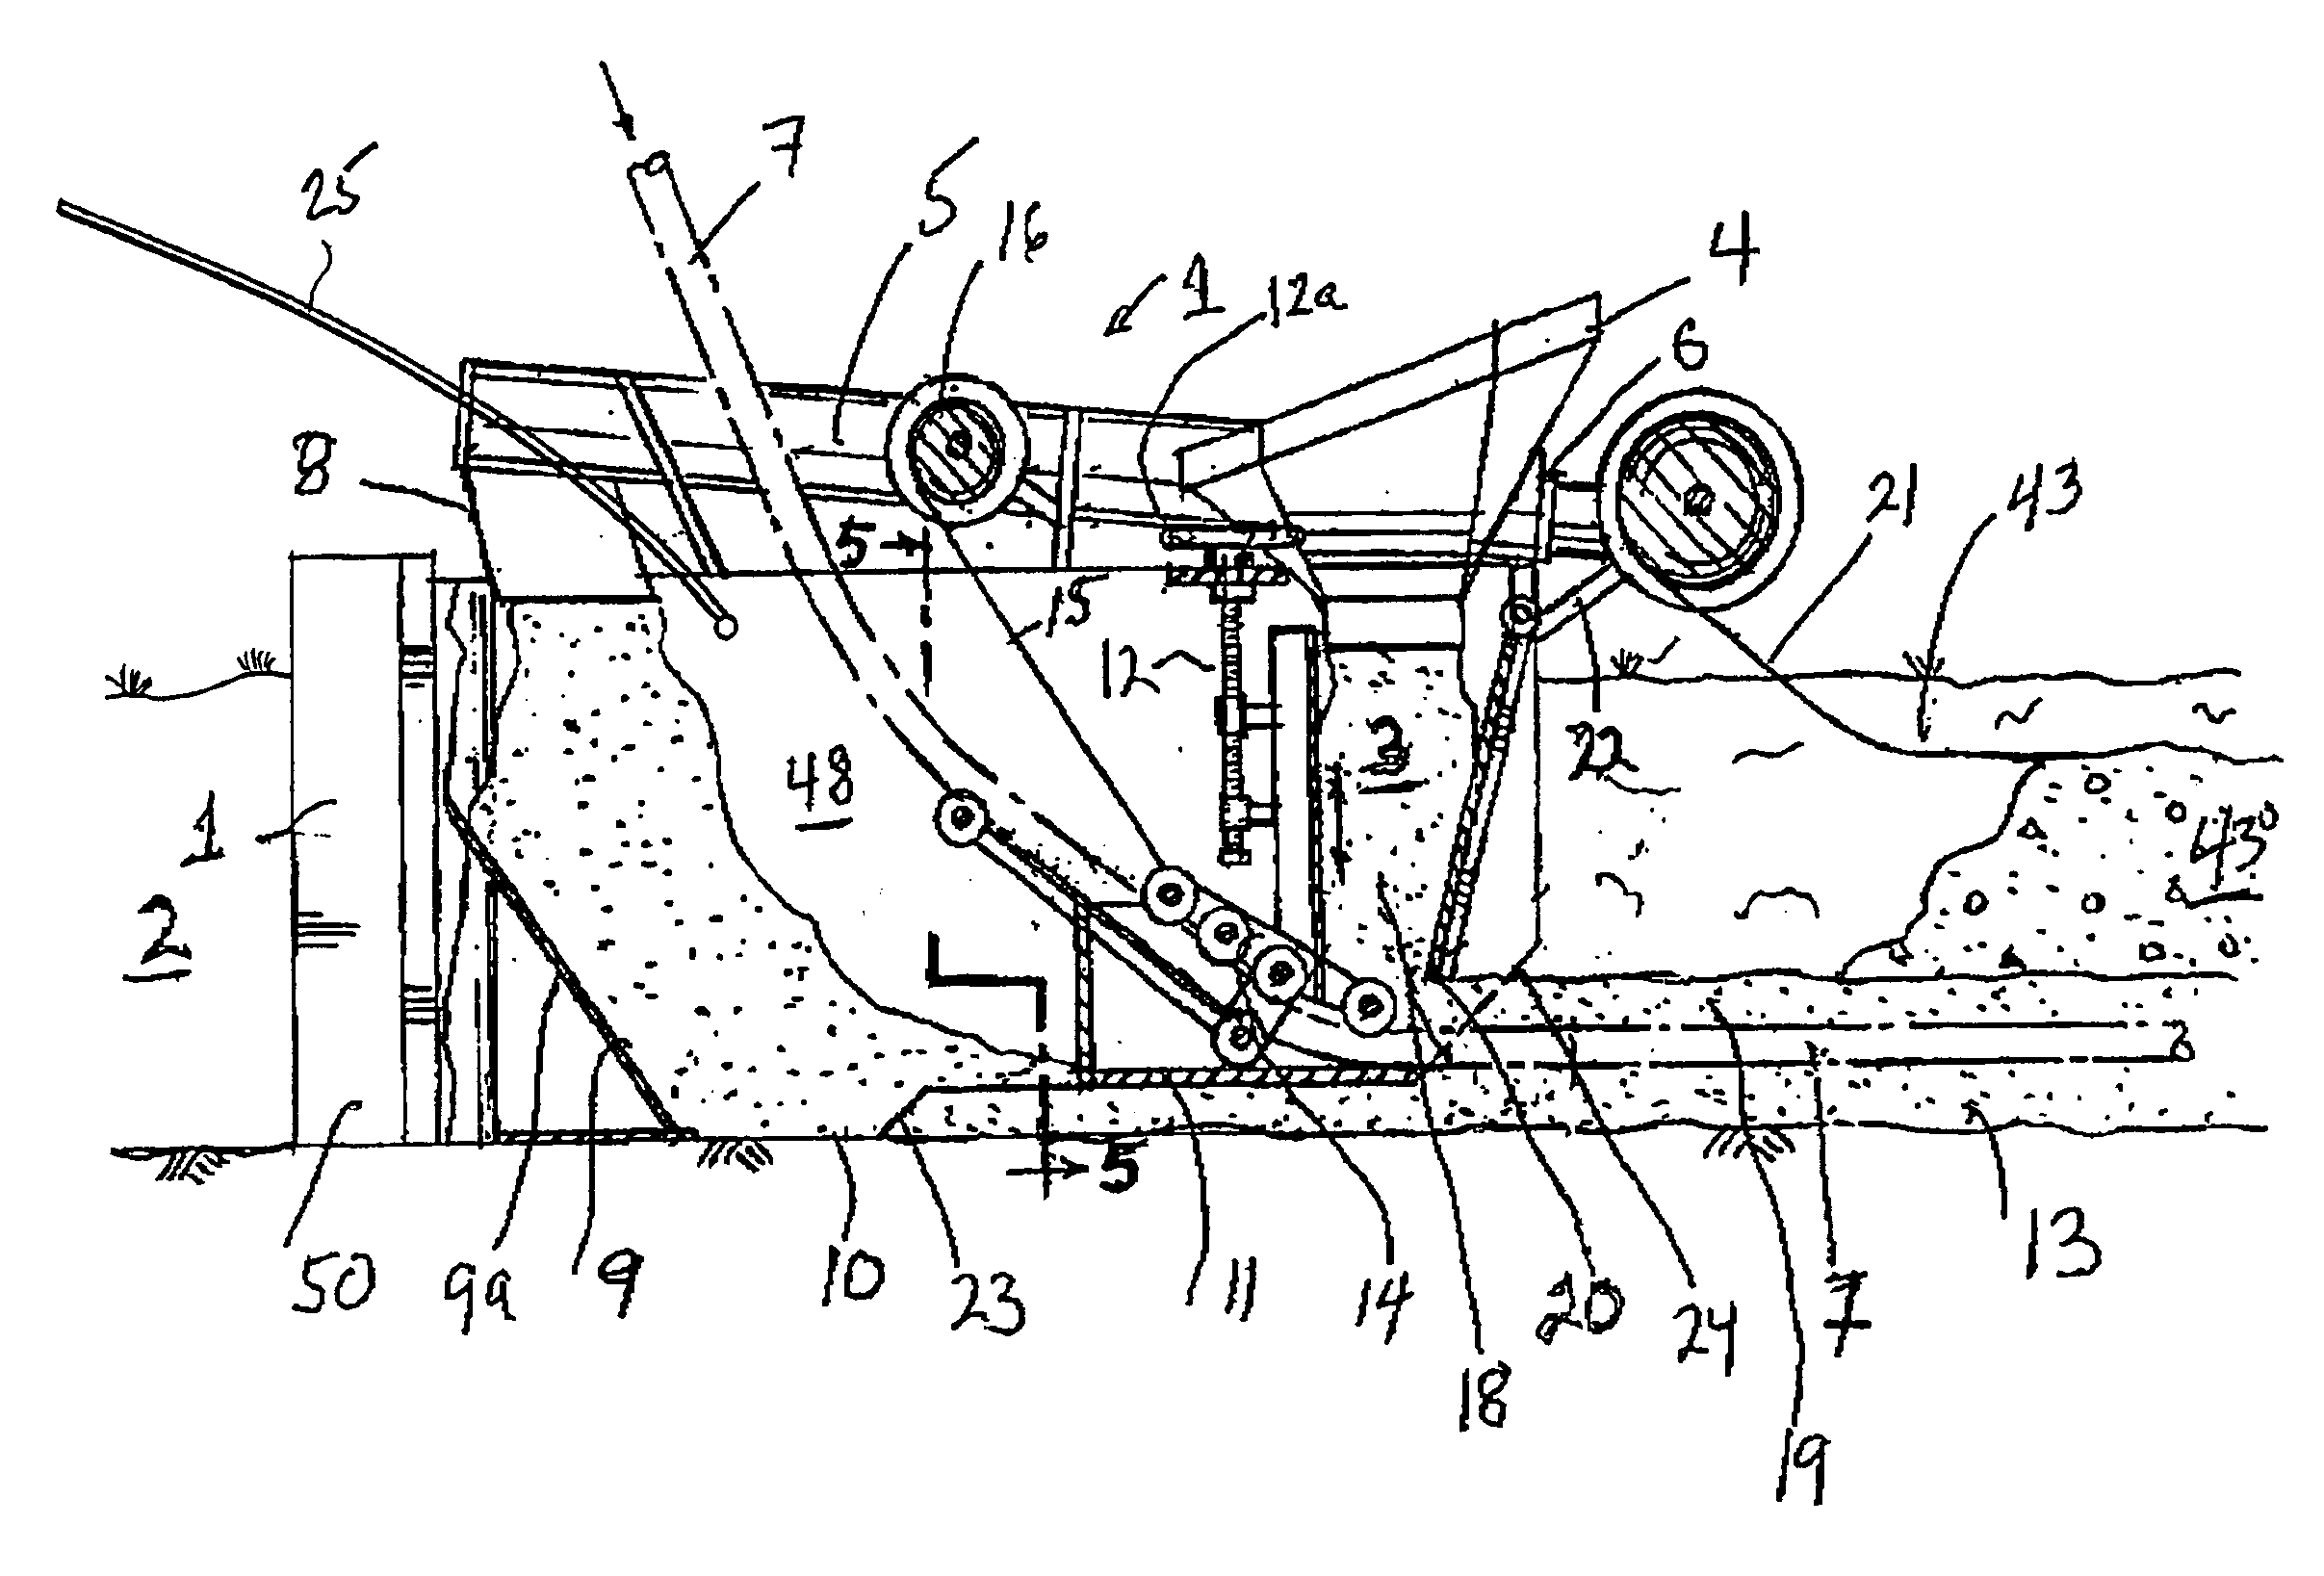 Apparatus for establishing adjustable depth bed in trenches for utility lines and encasing the lines